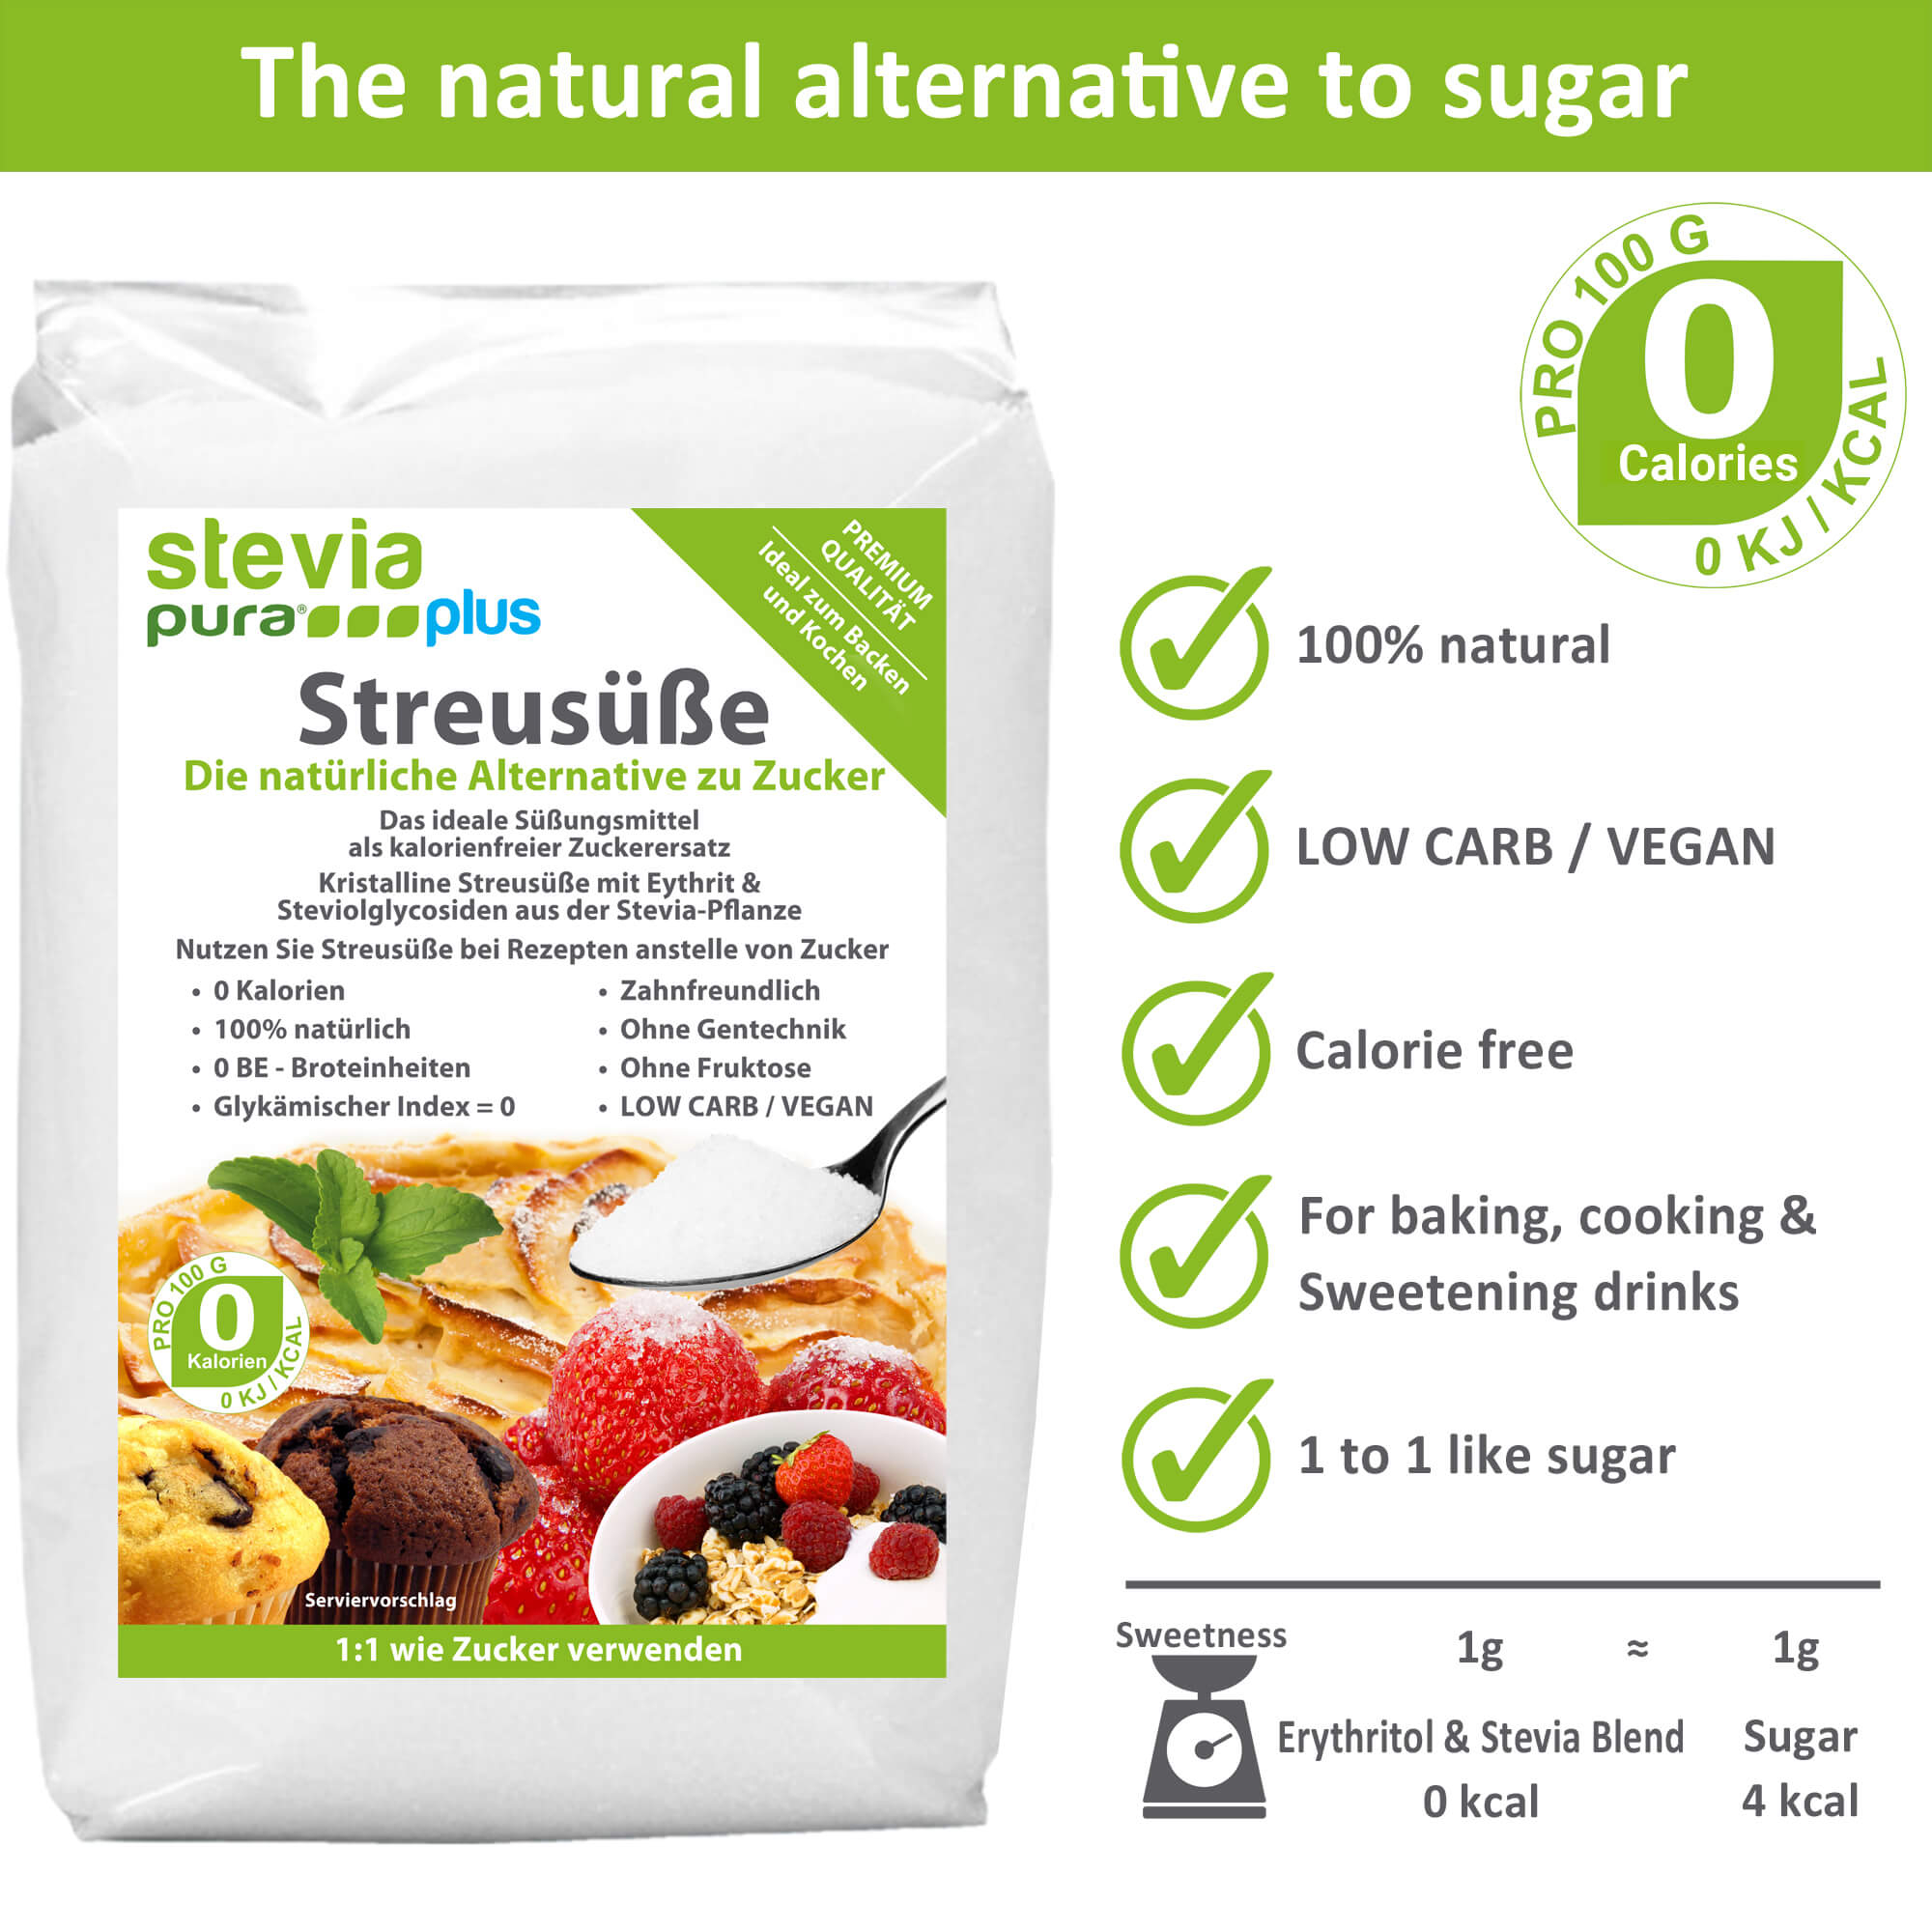 Stevia Leaf Extract blended with Erythritol Sweetener - The advantages of the spoonable sweetener sugar substitute